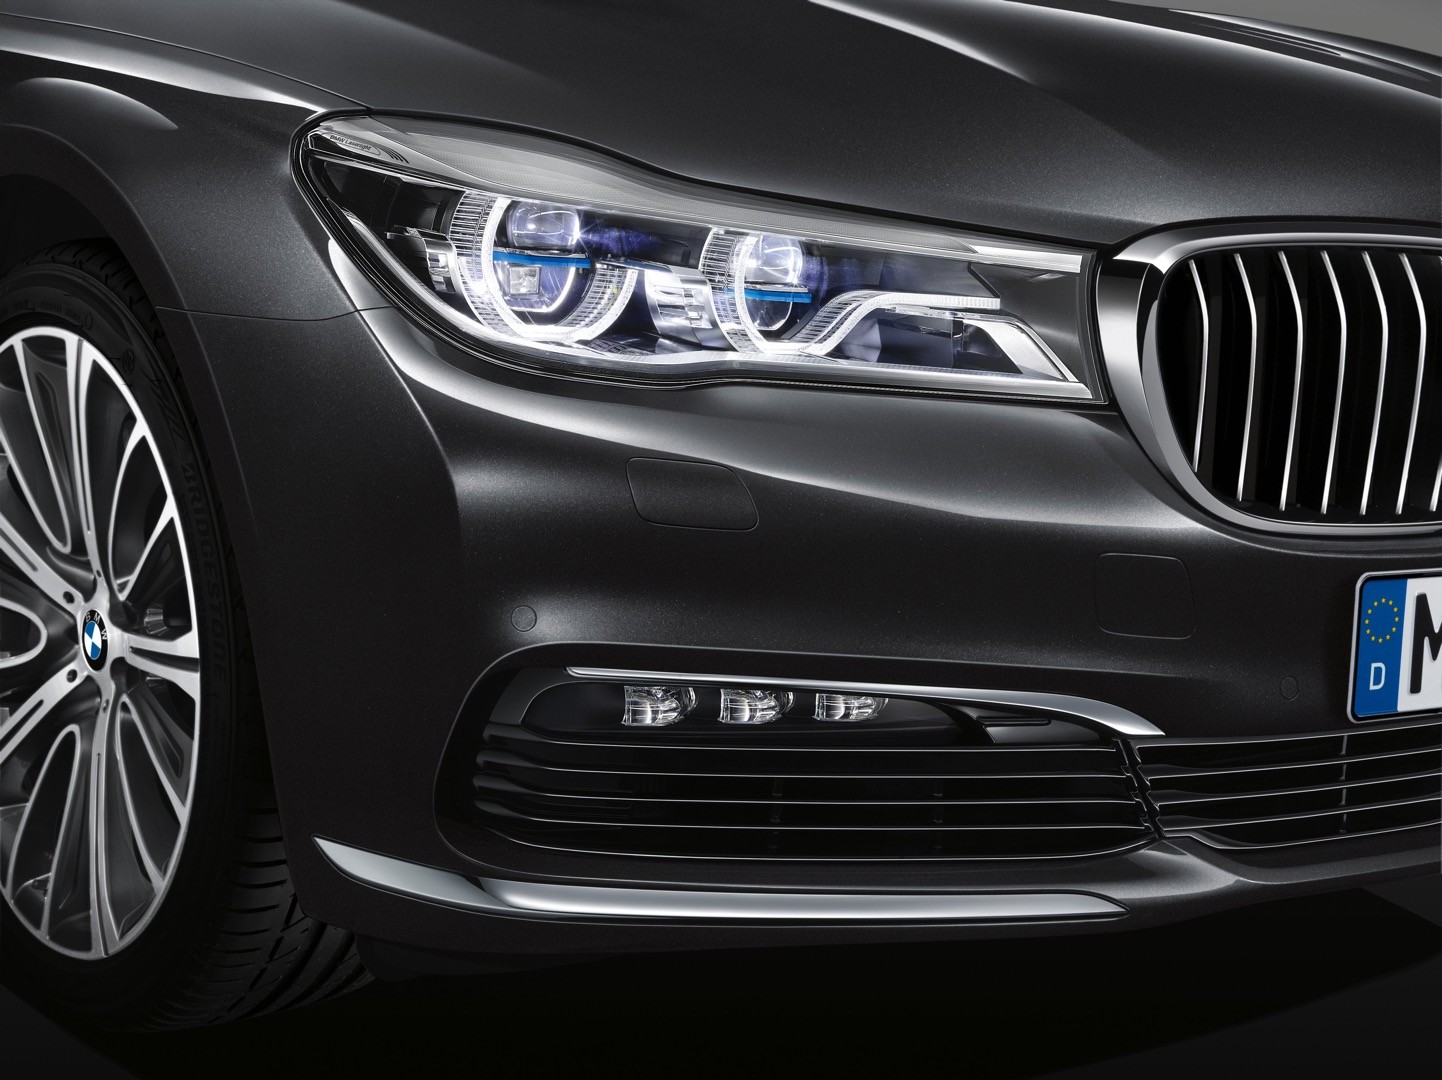 2016-bmw-7-series-finally-officially-unveiled-the-good-stuffs-inside-photo-gallery_88